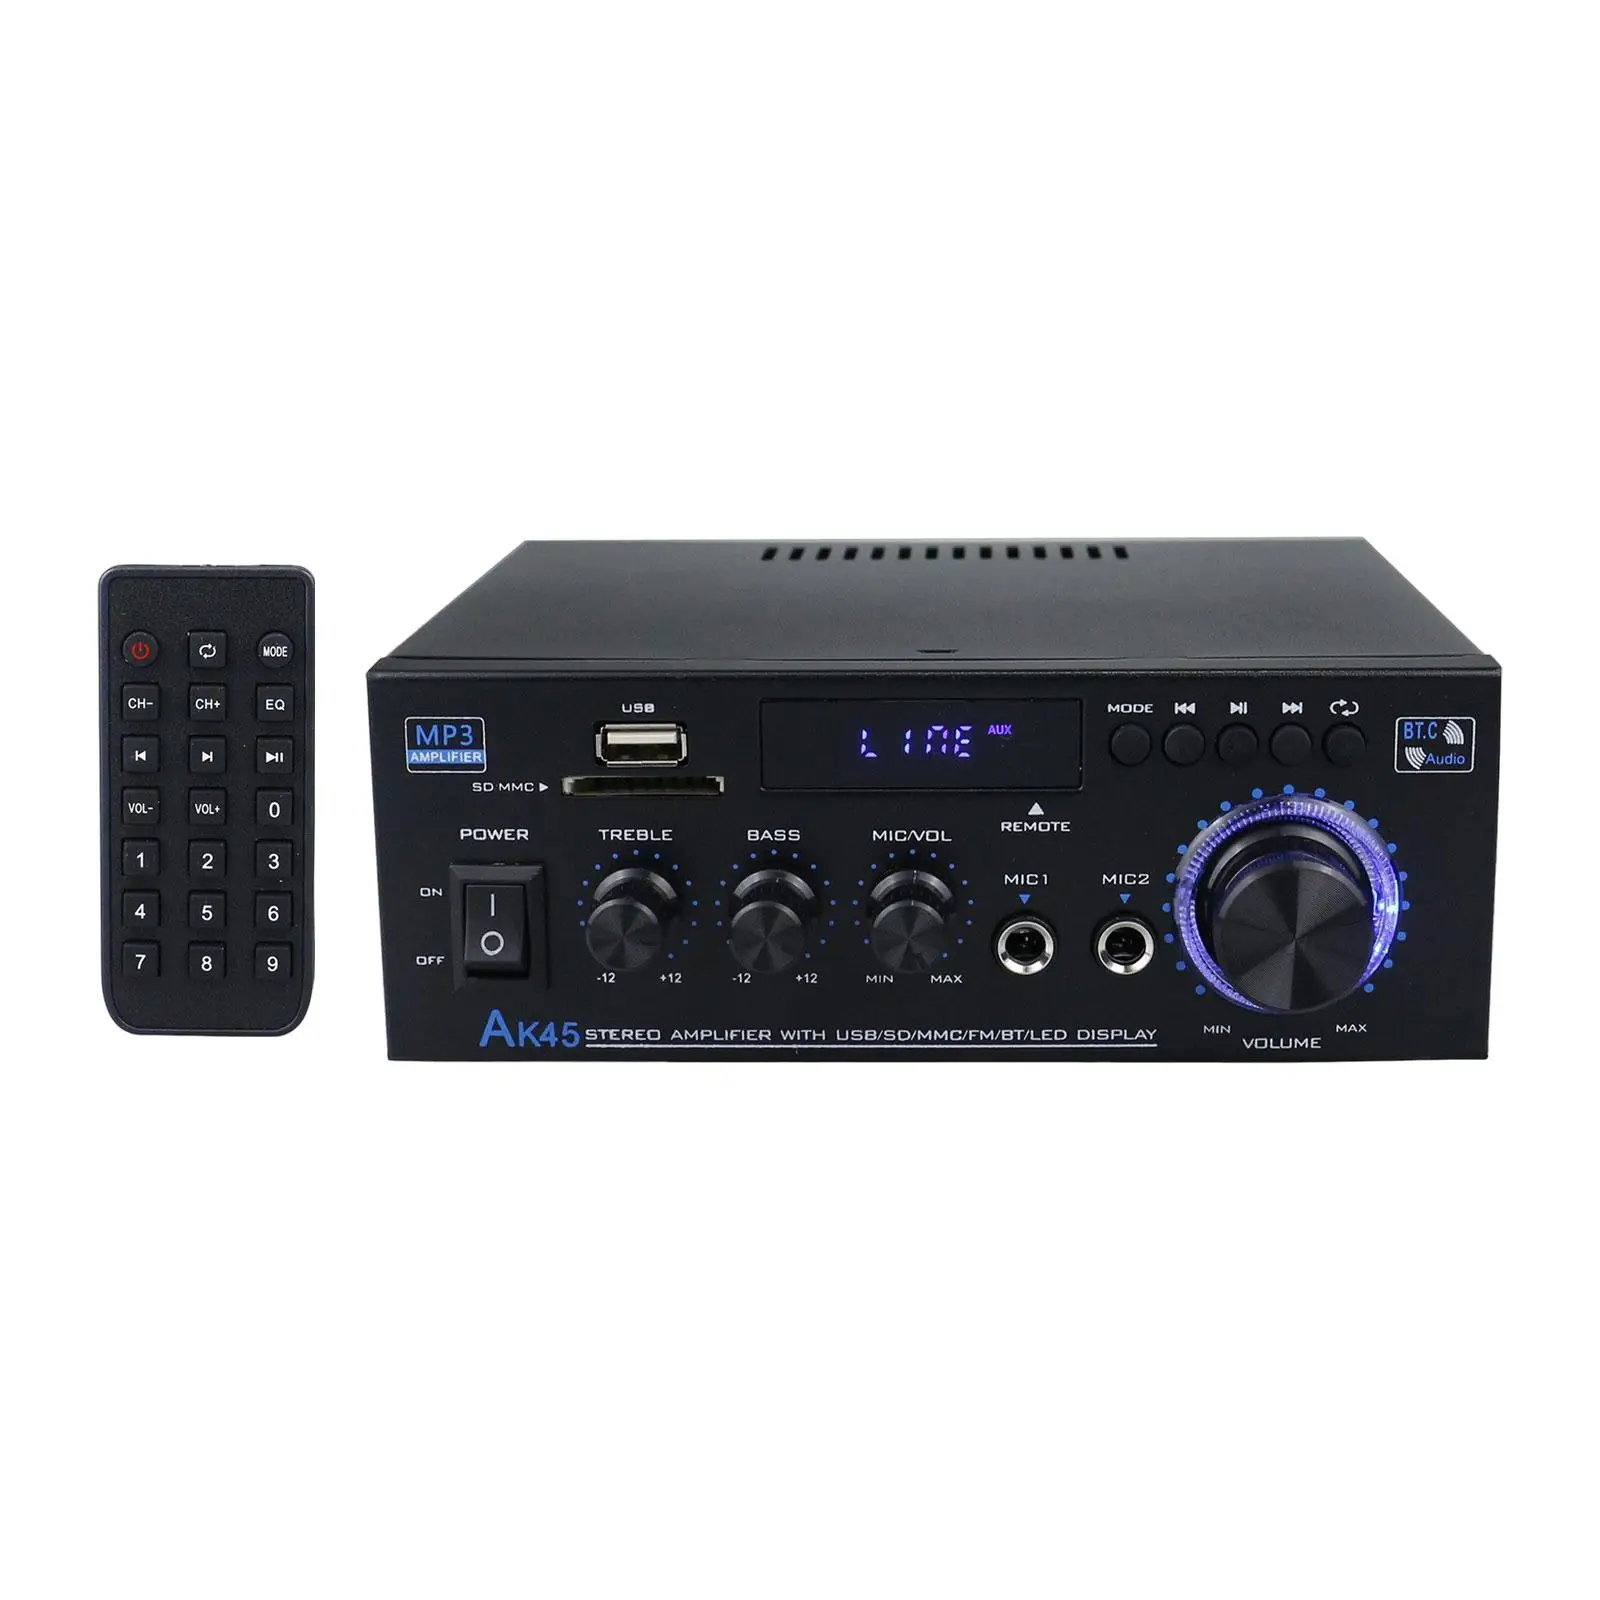 

AK45 Home Audio Amplifier with Mic with Treble Bass Control1 Treble Bass Control 2.0 Channel Audio Amp for Home Theater Speakers